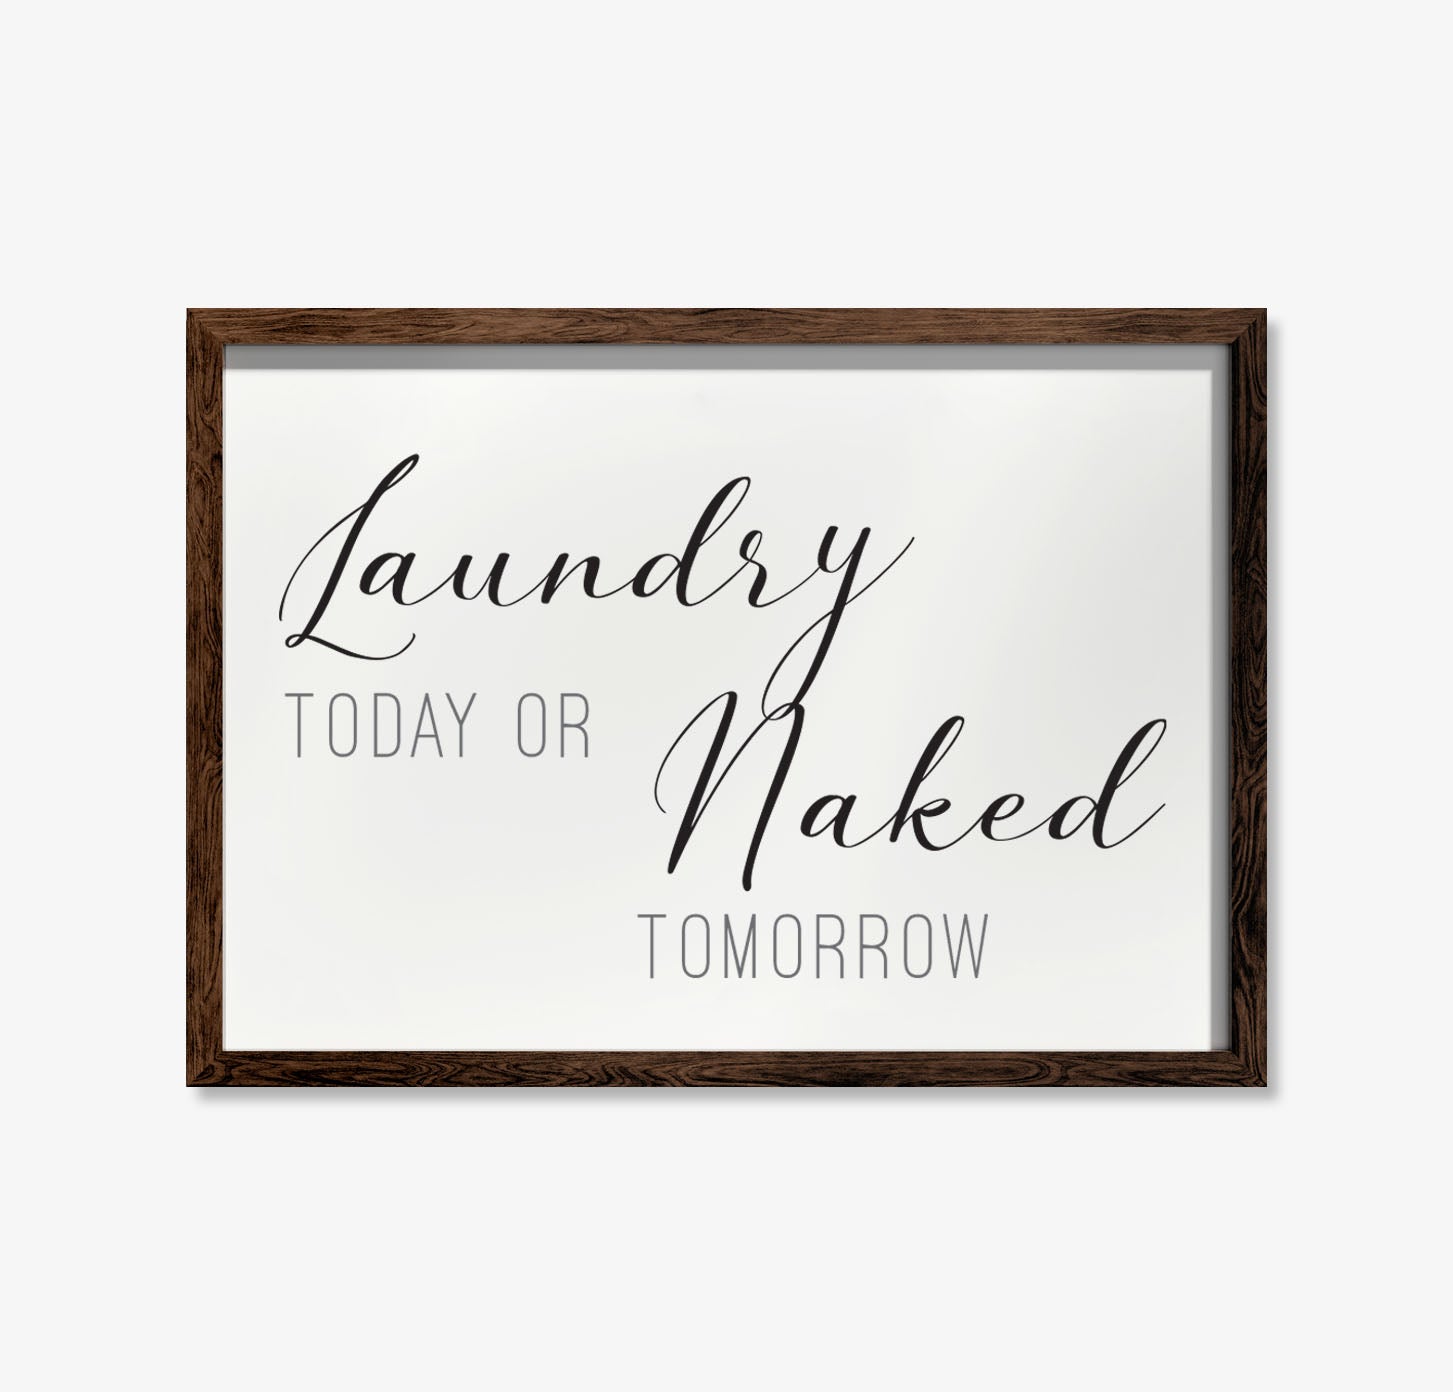 Laundry Today Or Naked Tomorrow - Wood Framed Wall Decor Sign - TheDecorCollection